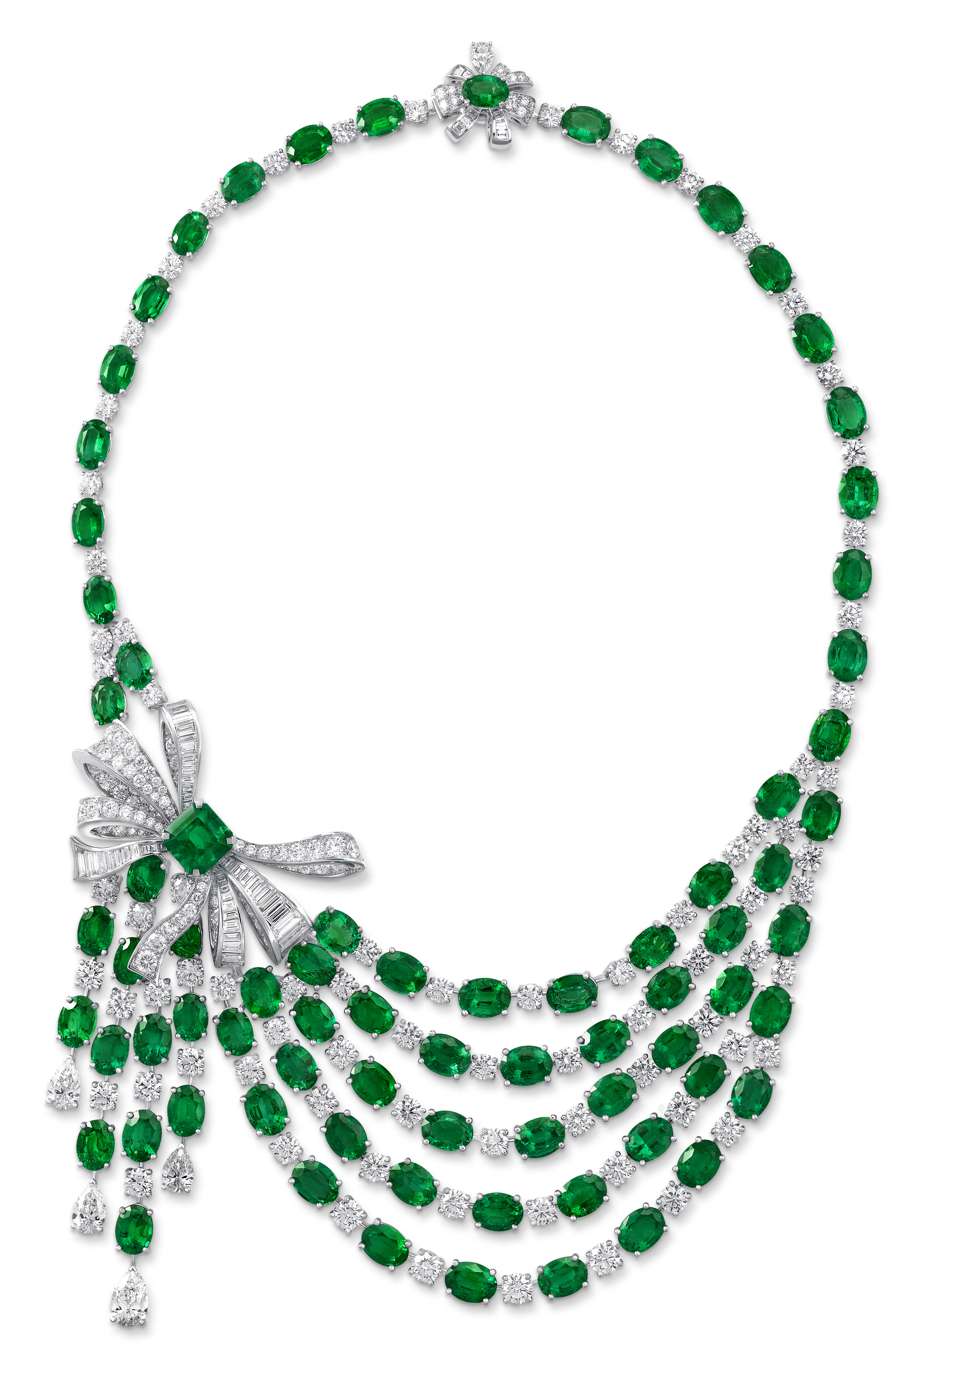 Draping chains of emeralds and diamonds are elegantly joined by a bow on one side of the necklace. Price on request